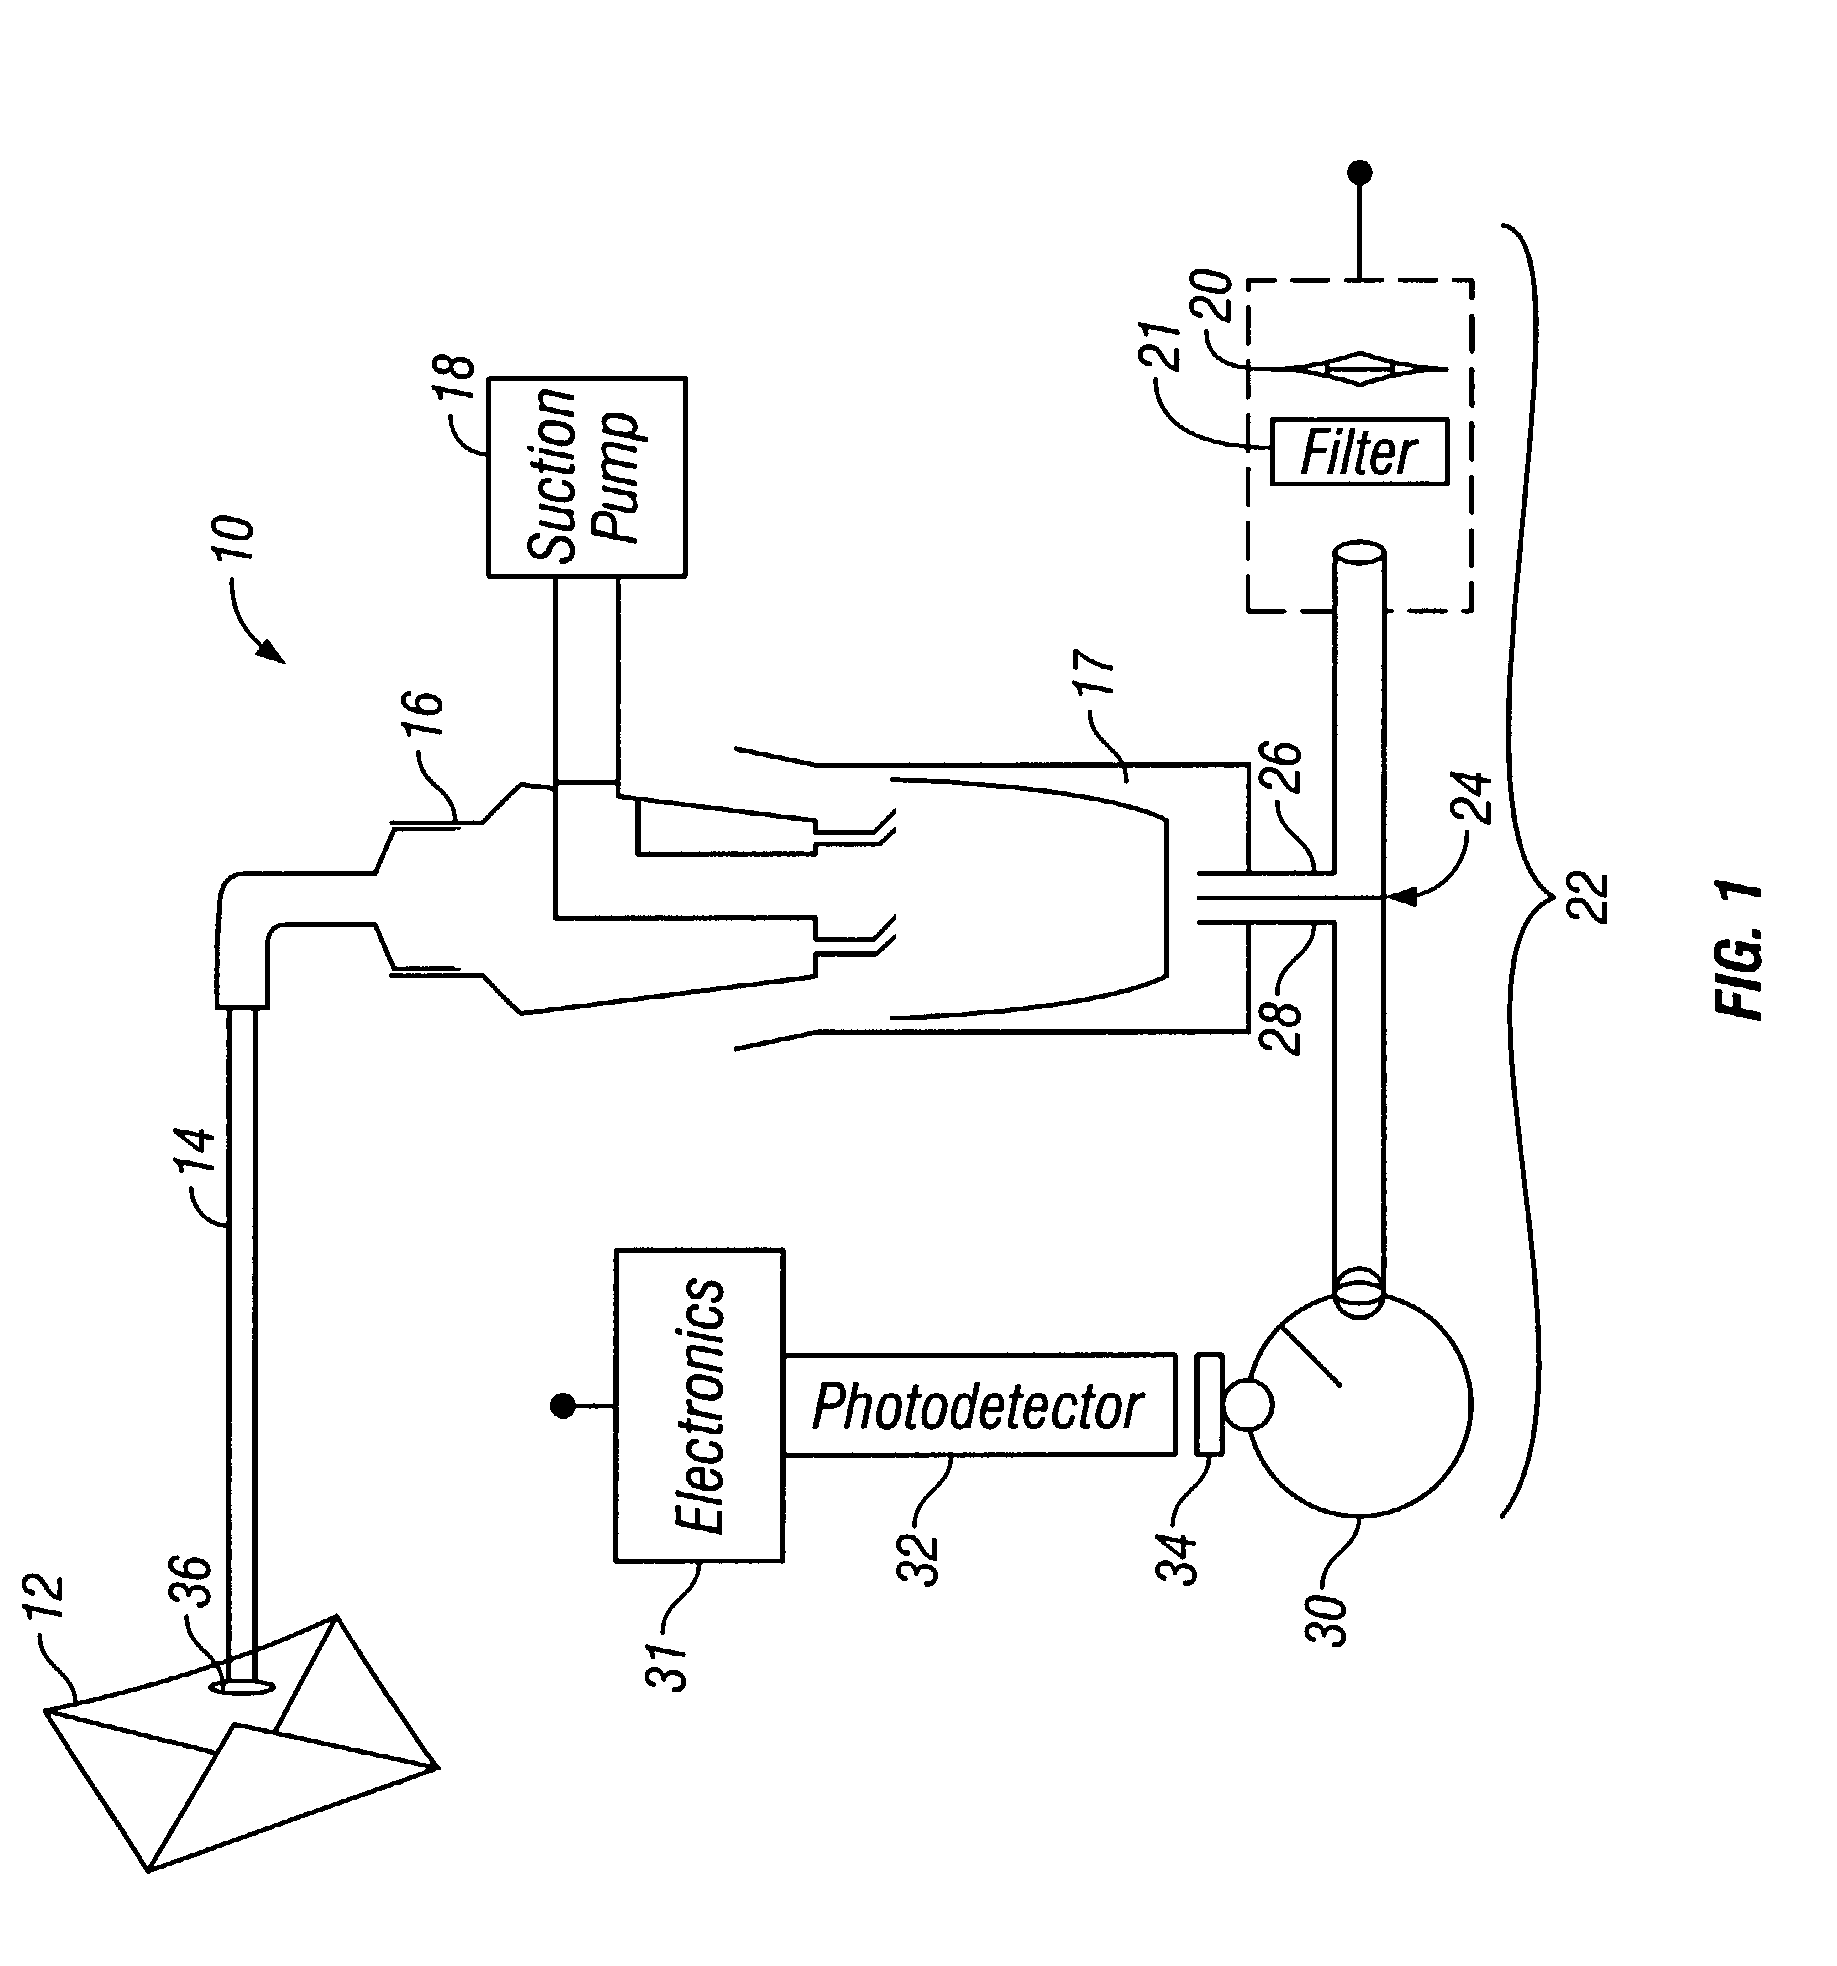 Method for detecting bacterial endospores in a sealed container